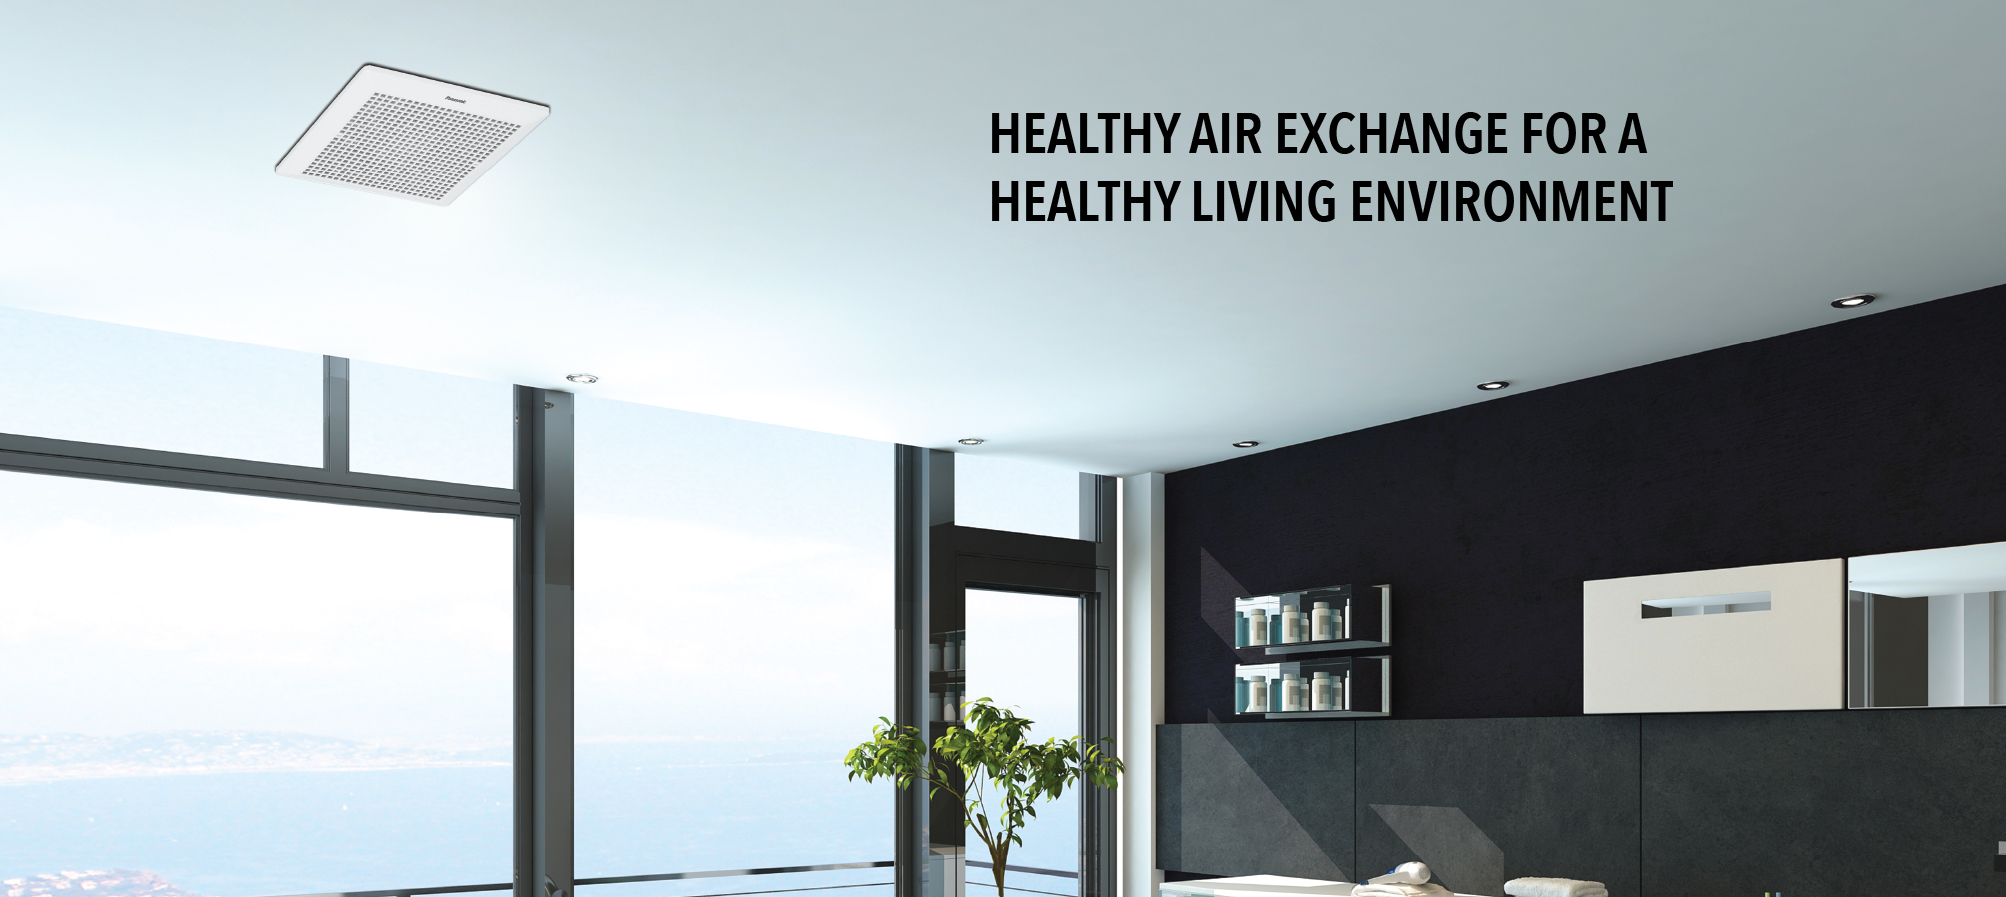 Panasonic Ventilation Fans ensure you and everyone in your home can enjoy a healthy, fresh environment with good air circulation.